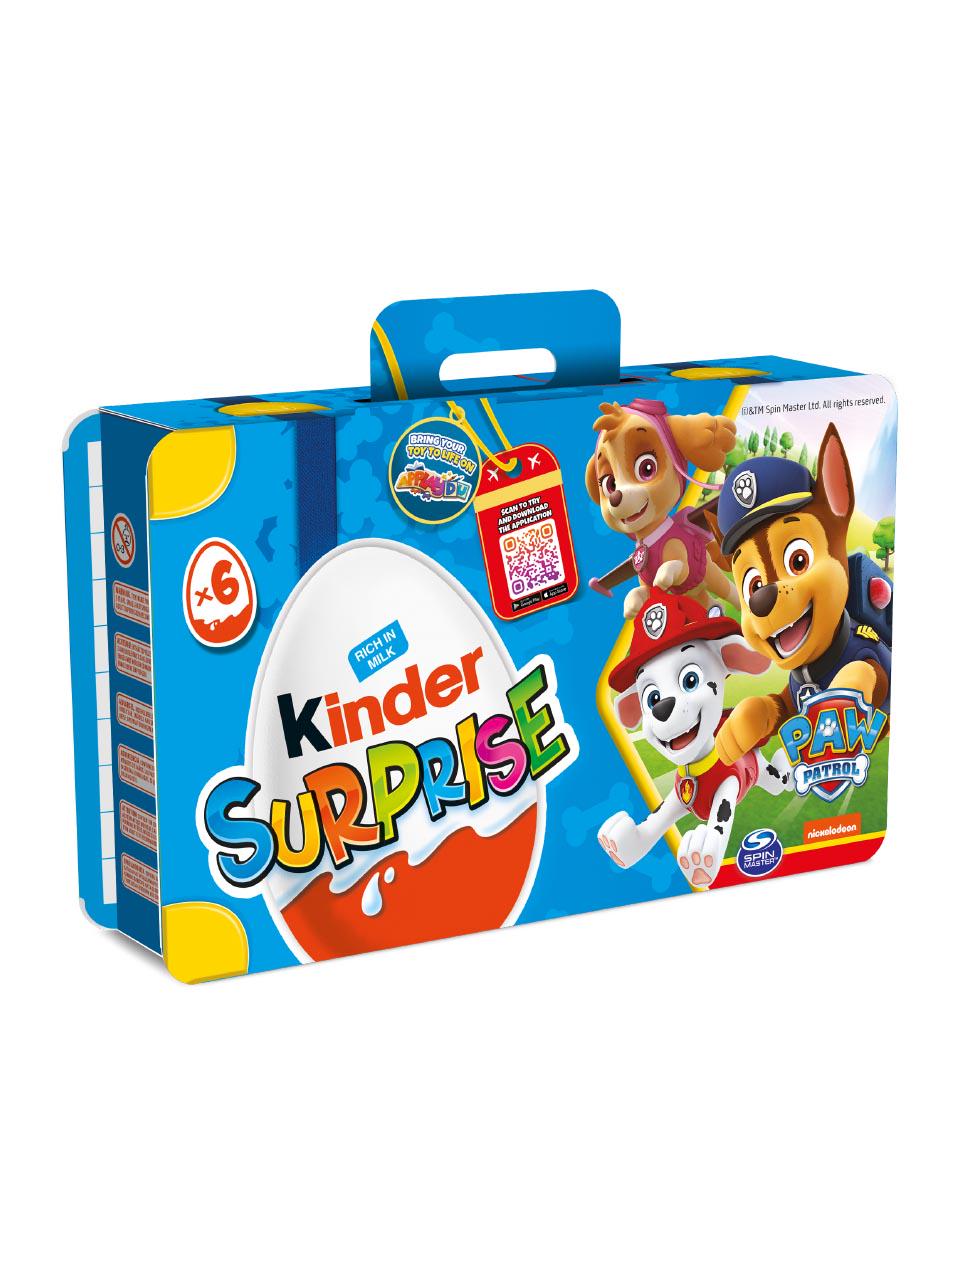 Kinder Surprise Paw Patrol in the luggage-shaped case with toys 120g.